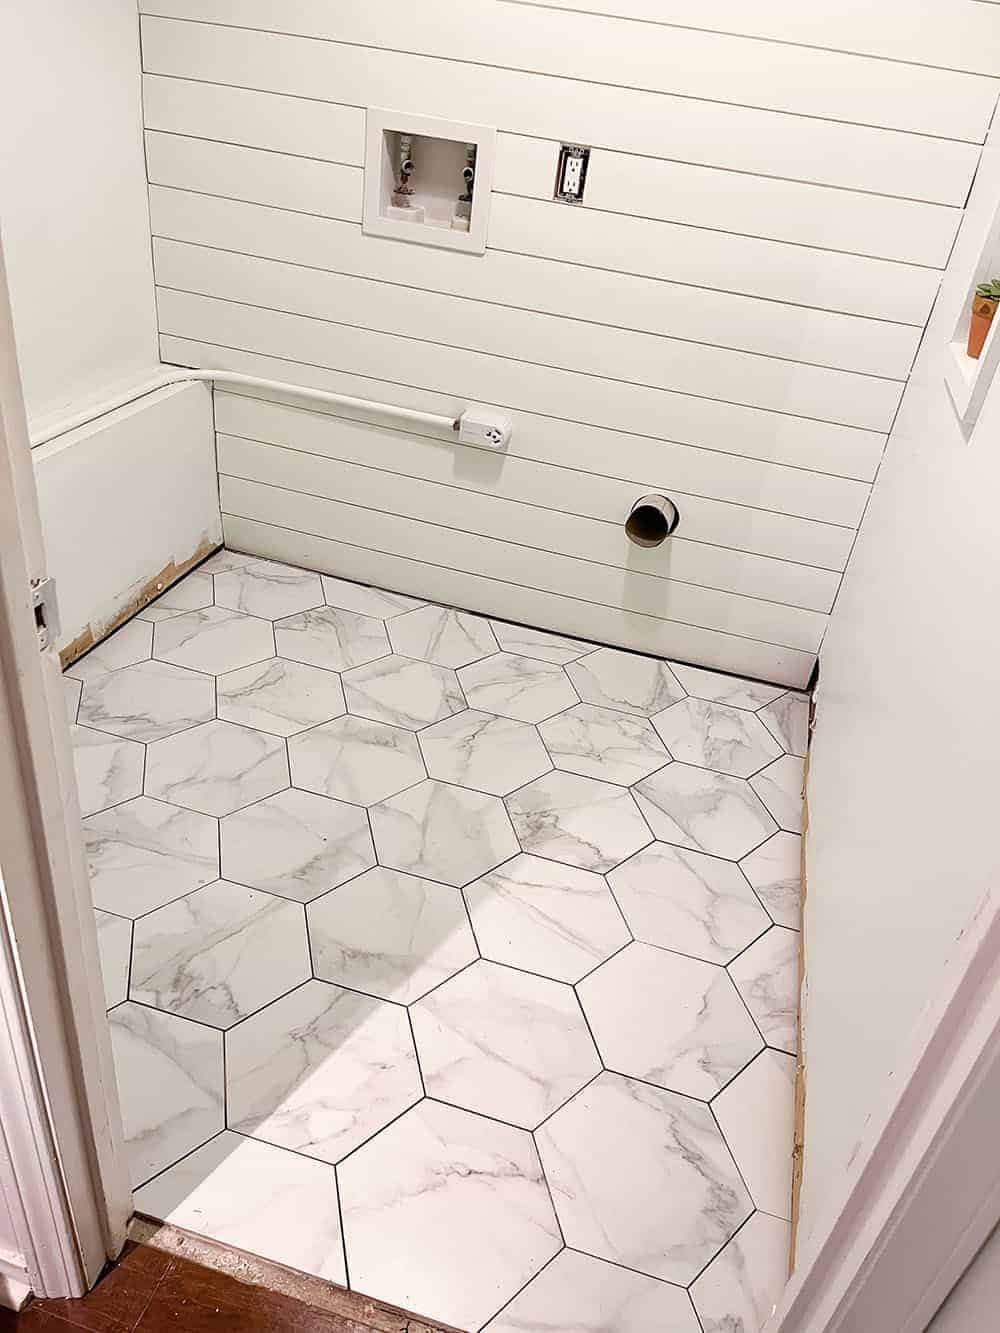 A DIY LAUNDRY ROOM RENOVATION ON A $500 BUDGET!, Oh So Lovely Blog